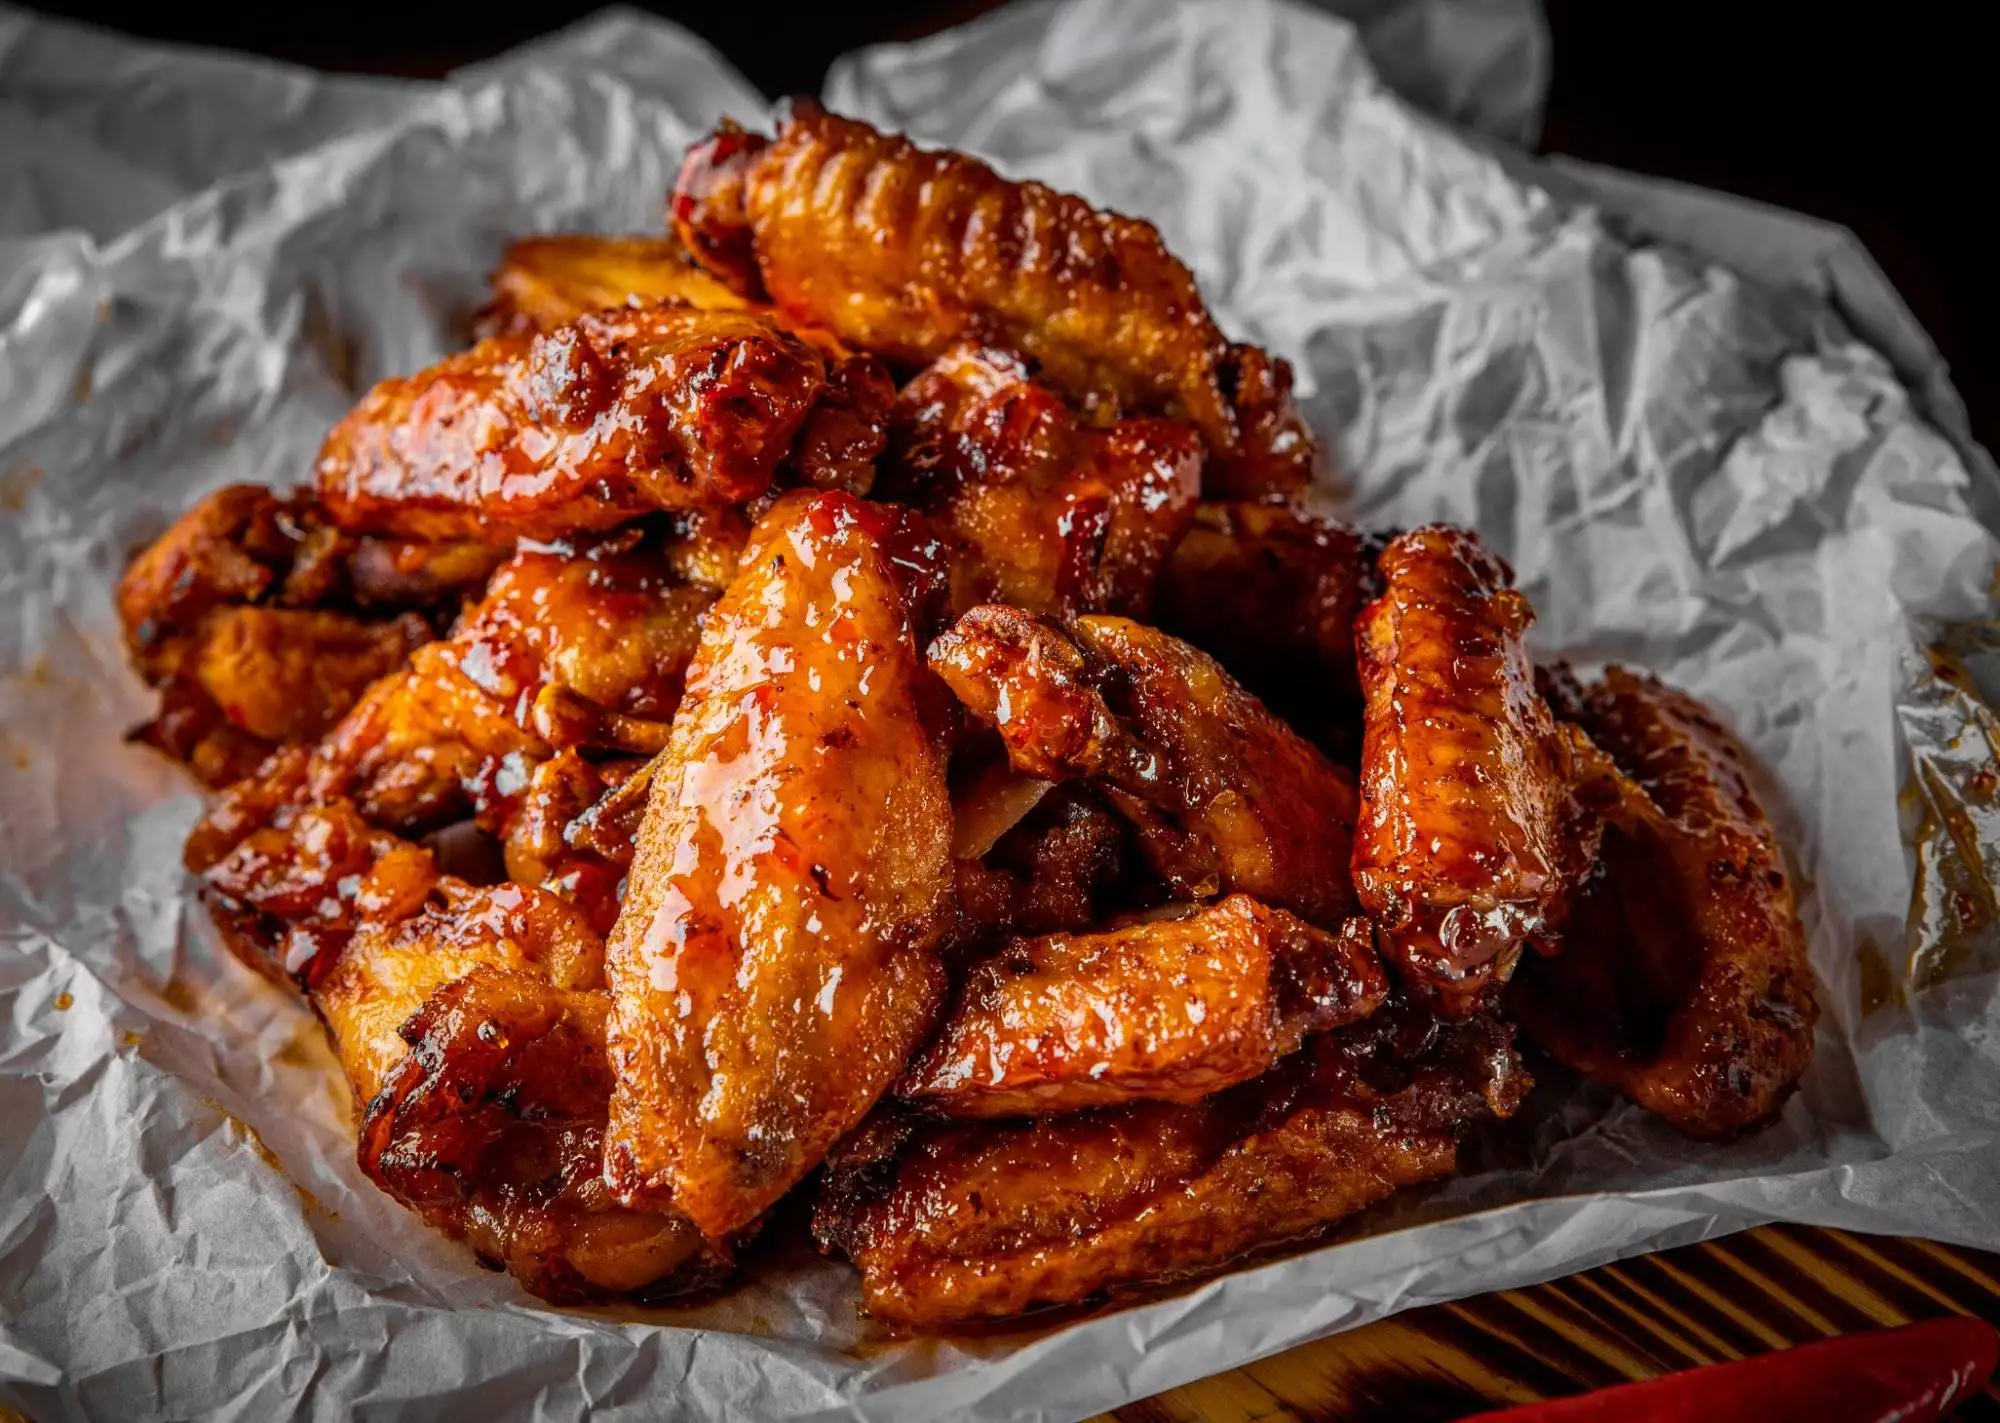 Enjoy Delicious Wings at Grapevine Wingstop in Park Place